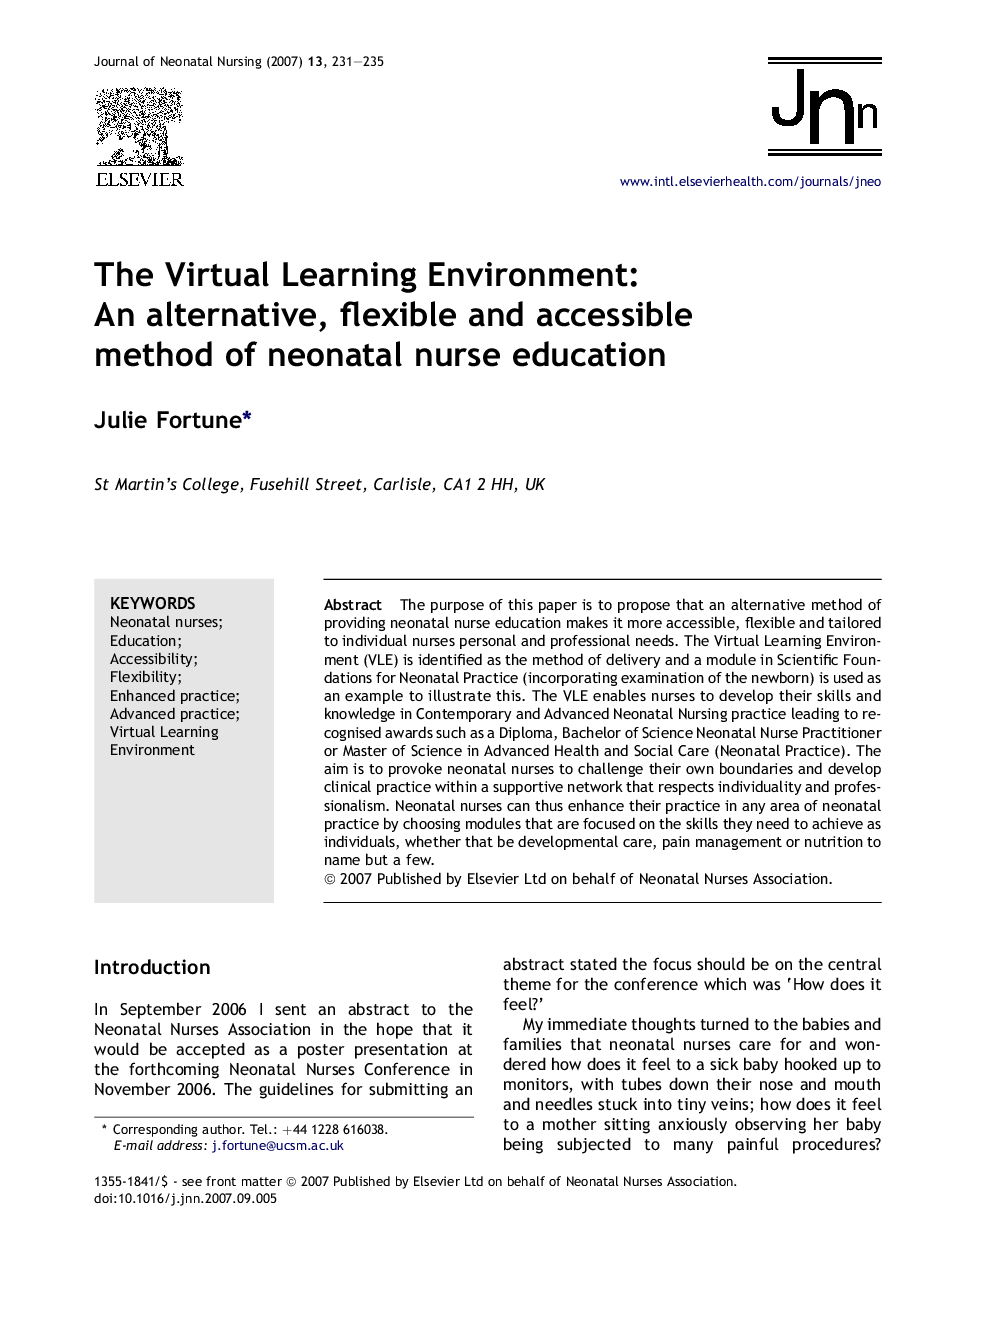 The Virtual Learning Environment: An alternative, flexible and accessible method of neonatal nurse education